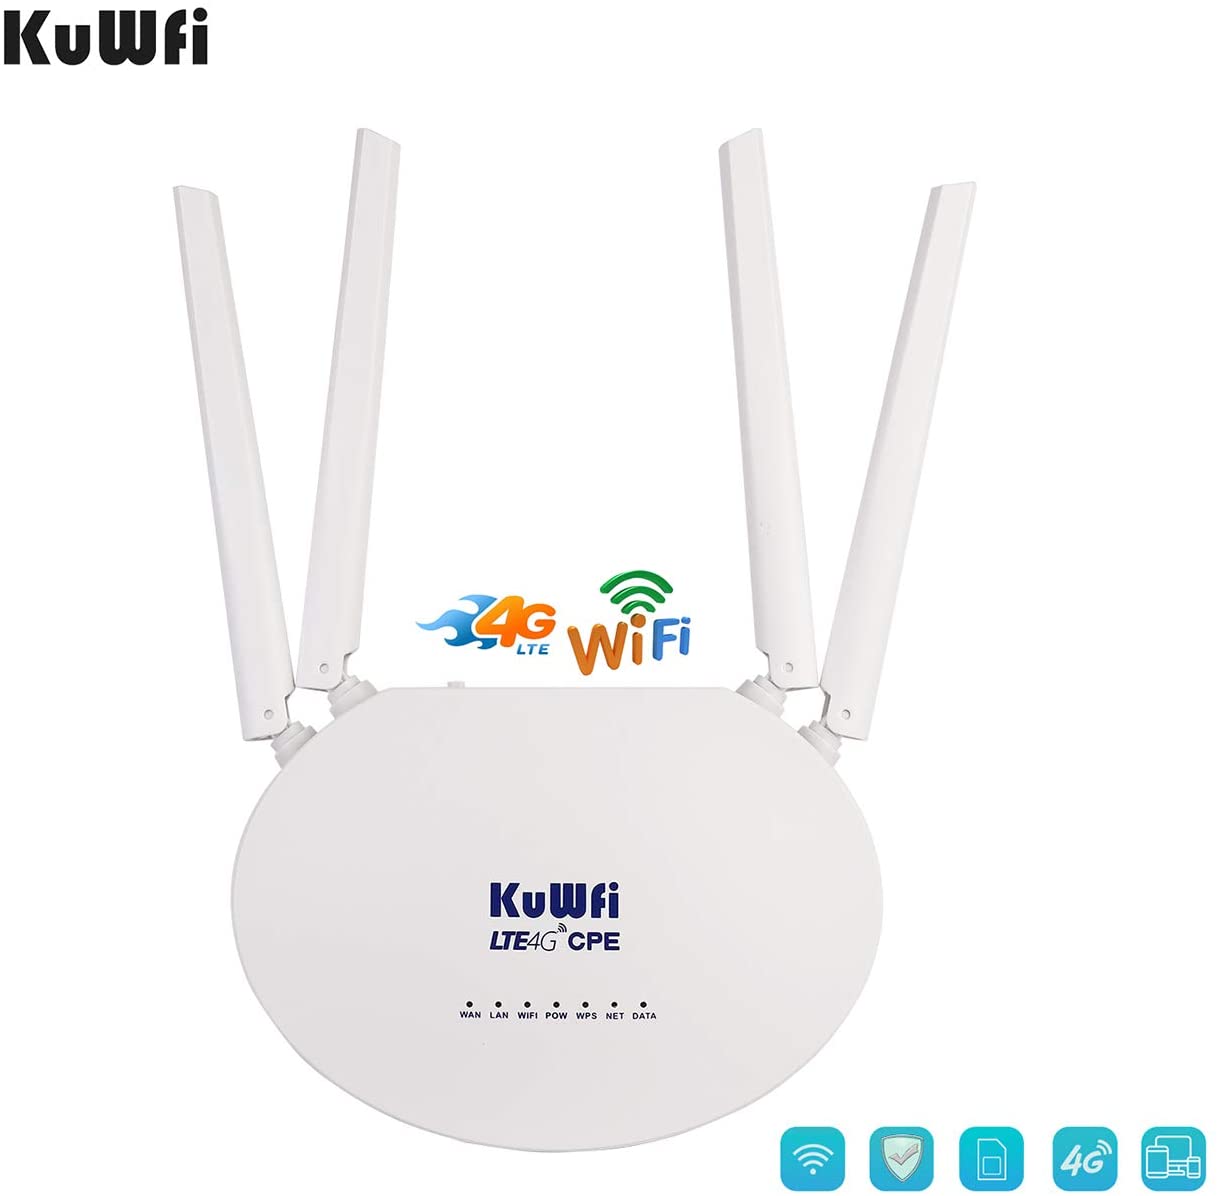 KuWFi Waterproof Outdoor 4G WiFi Router 150Mbps CAT4 LTE Routers 3G/4G SIM  Card Router Modem for IP Camera/Outside WiFi Coverage